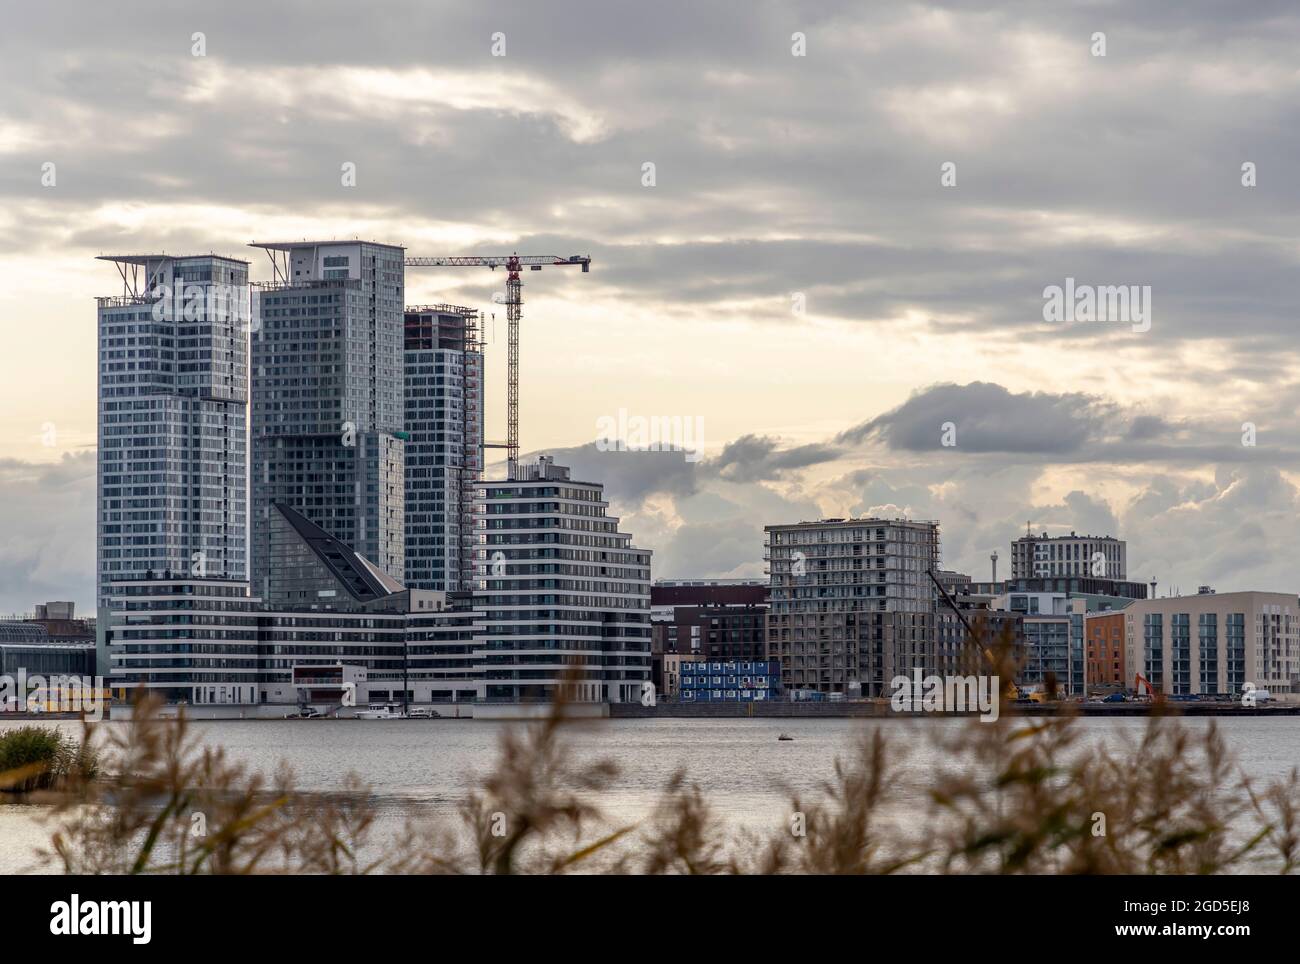 High rise buildings, some still under construction, in Kalasatama. Room for text. Stock Photo